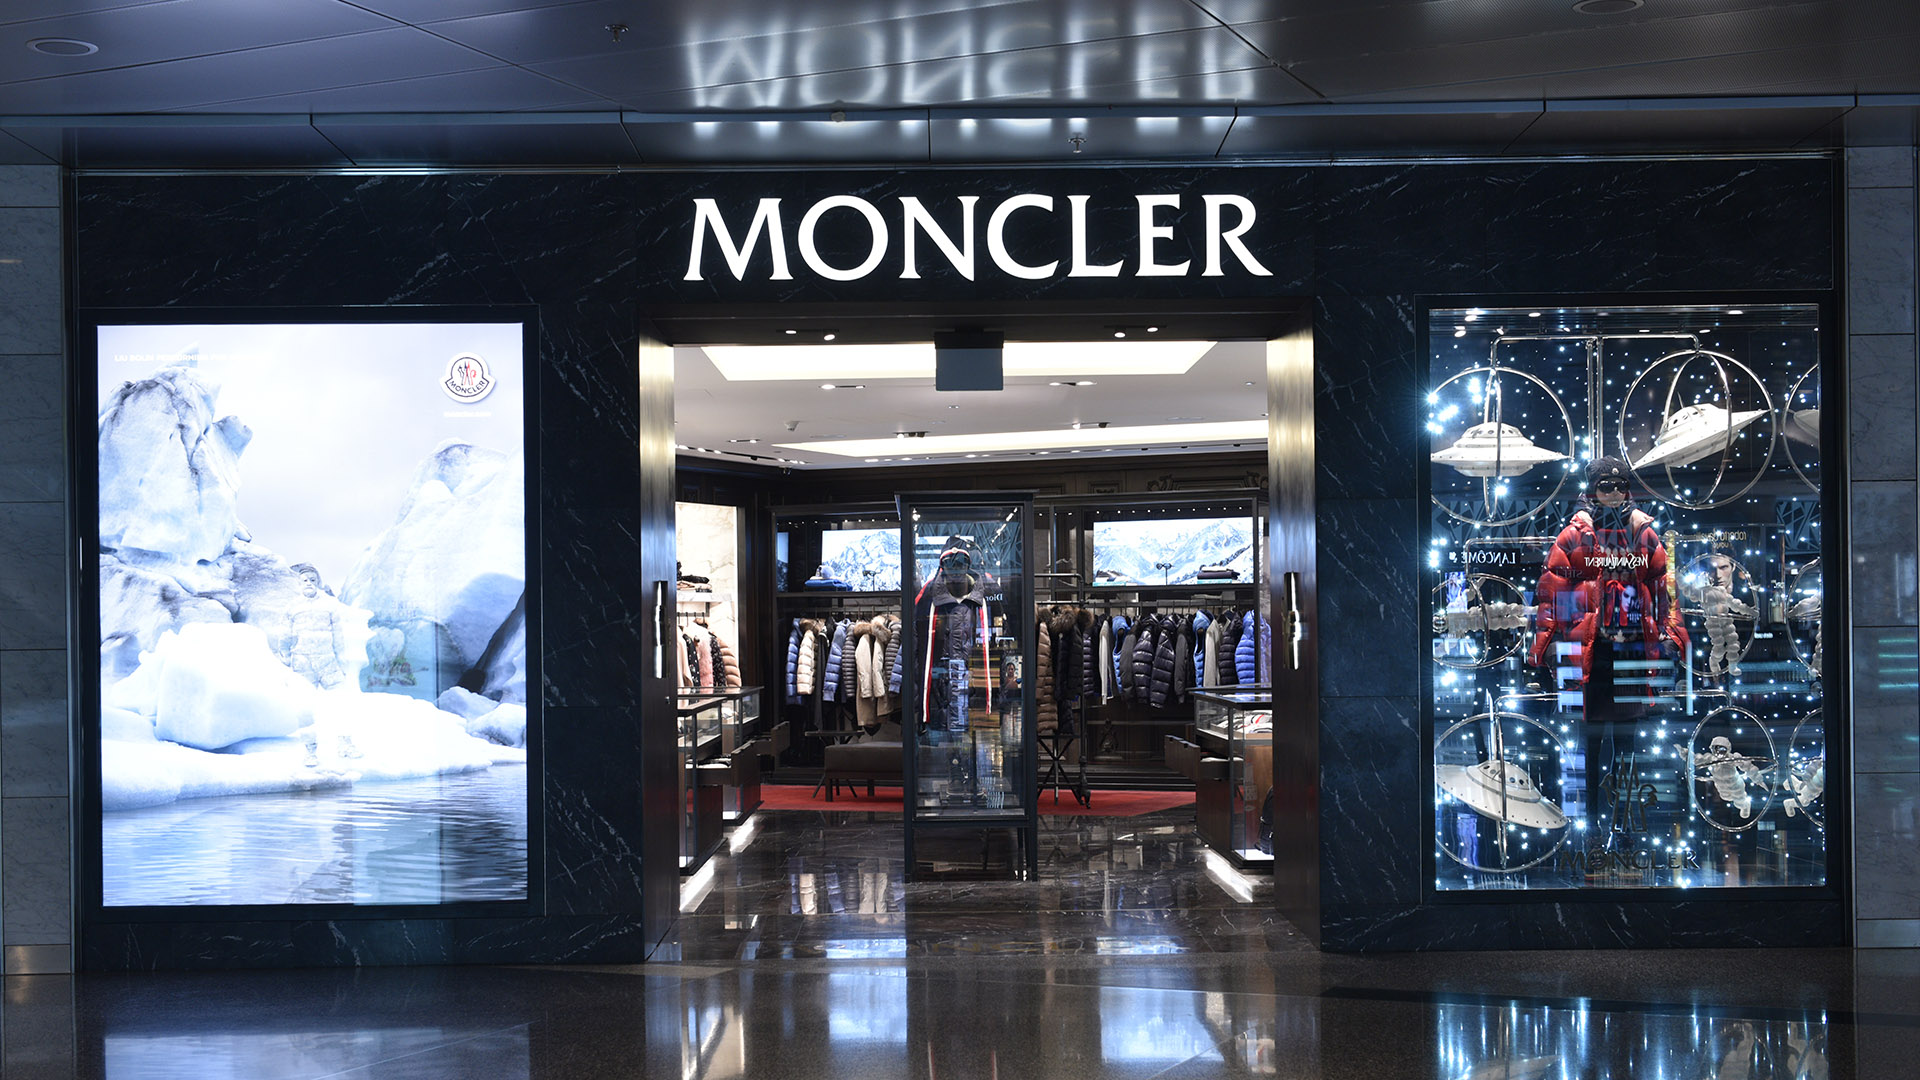 Moncler Spaceman Window at Hamad International Airport - fabricated and installed by ME Visual, Qatar. This display uses Fiber-optic lights.